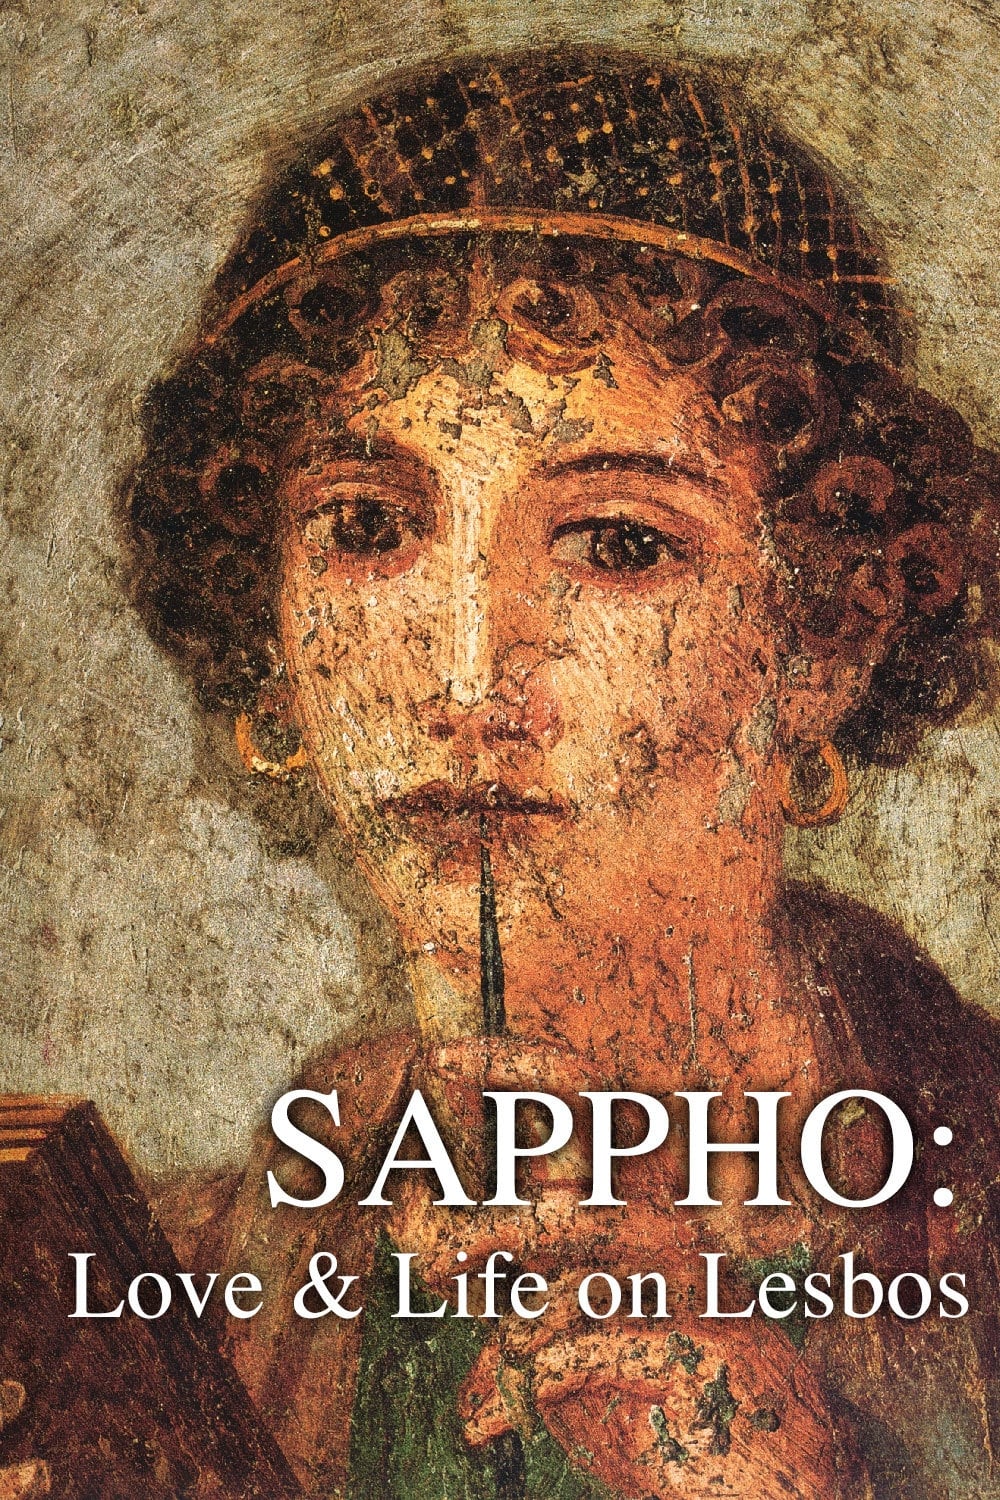 Sappho: Love and Life on Lesbos